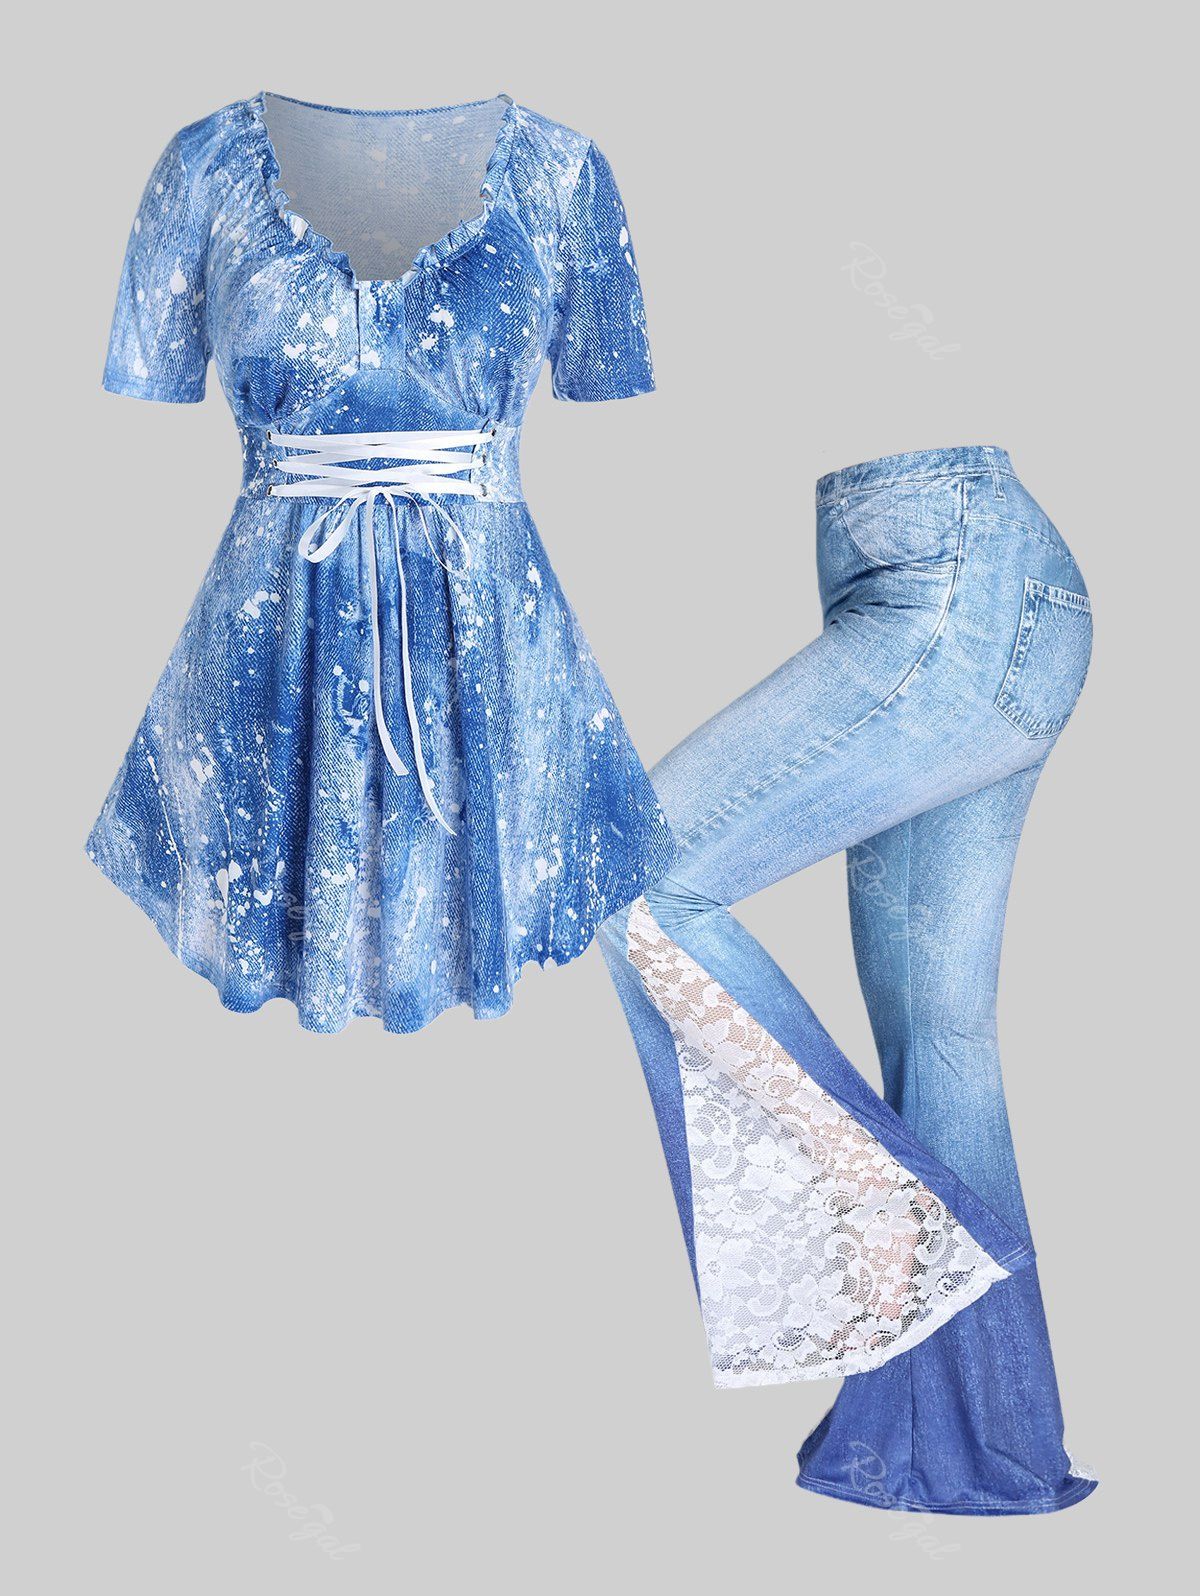 Hot 3D Denim Print Lace Up Tee and Lace Panel Bell Bottom Pants Plus Size Outfit  